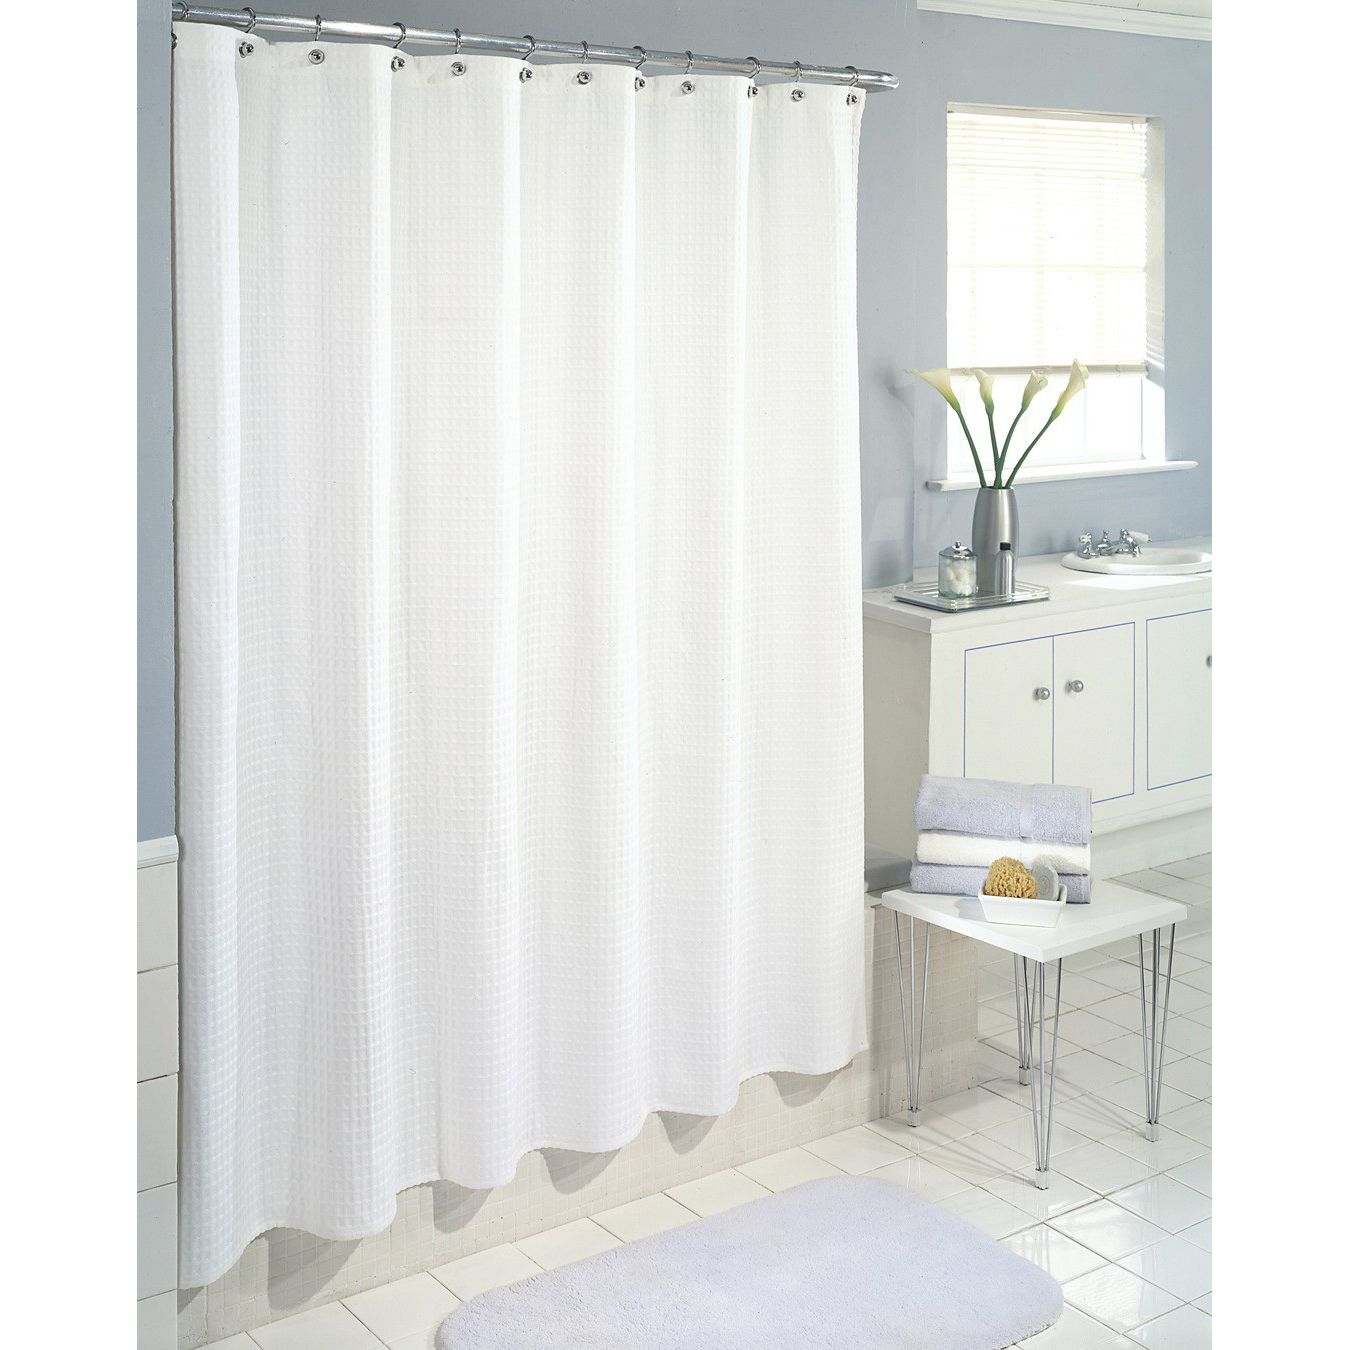 Colormate Waffle Wave Fabric Shower, Bed Bath Beyond Shower Curtains Fabric